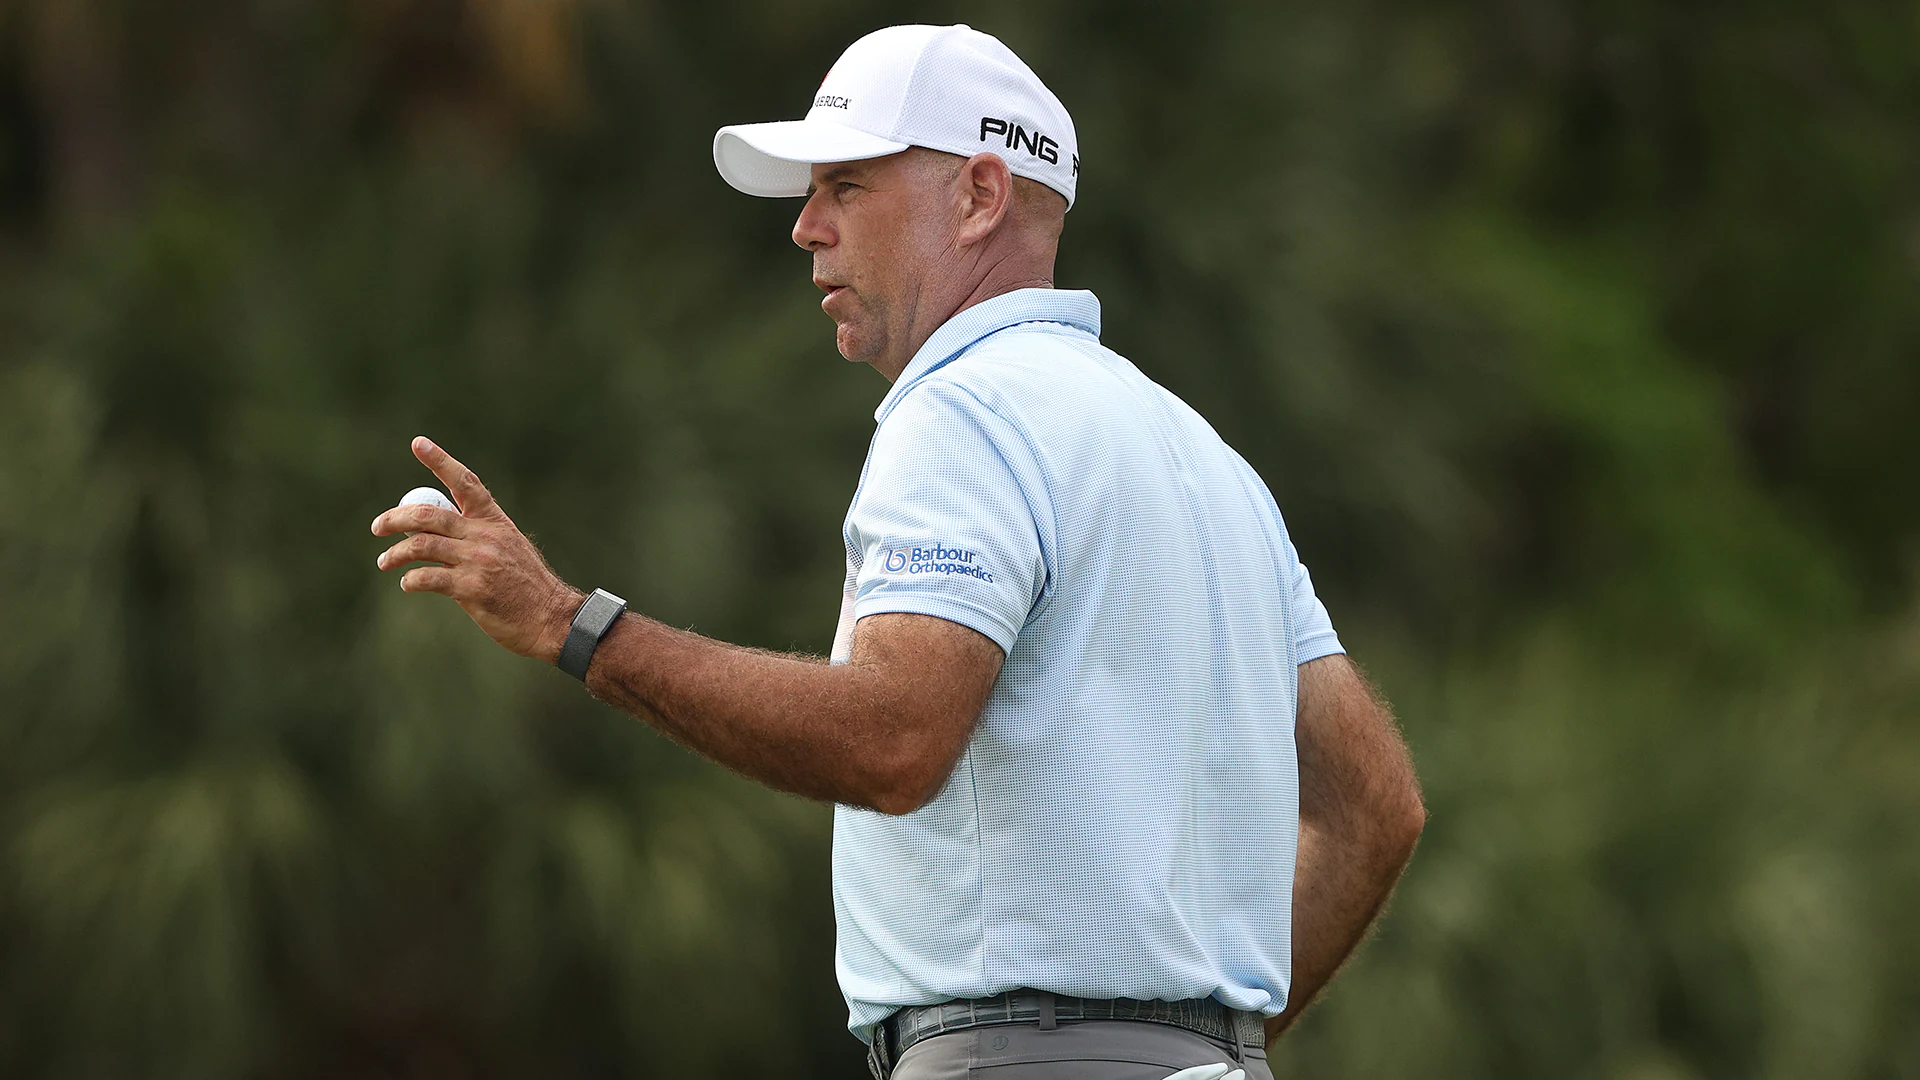 Stewart Cink, 47, wins RBC Heritage for second victory of season